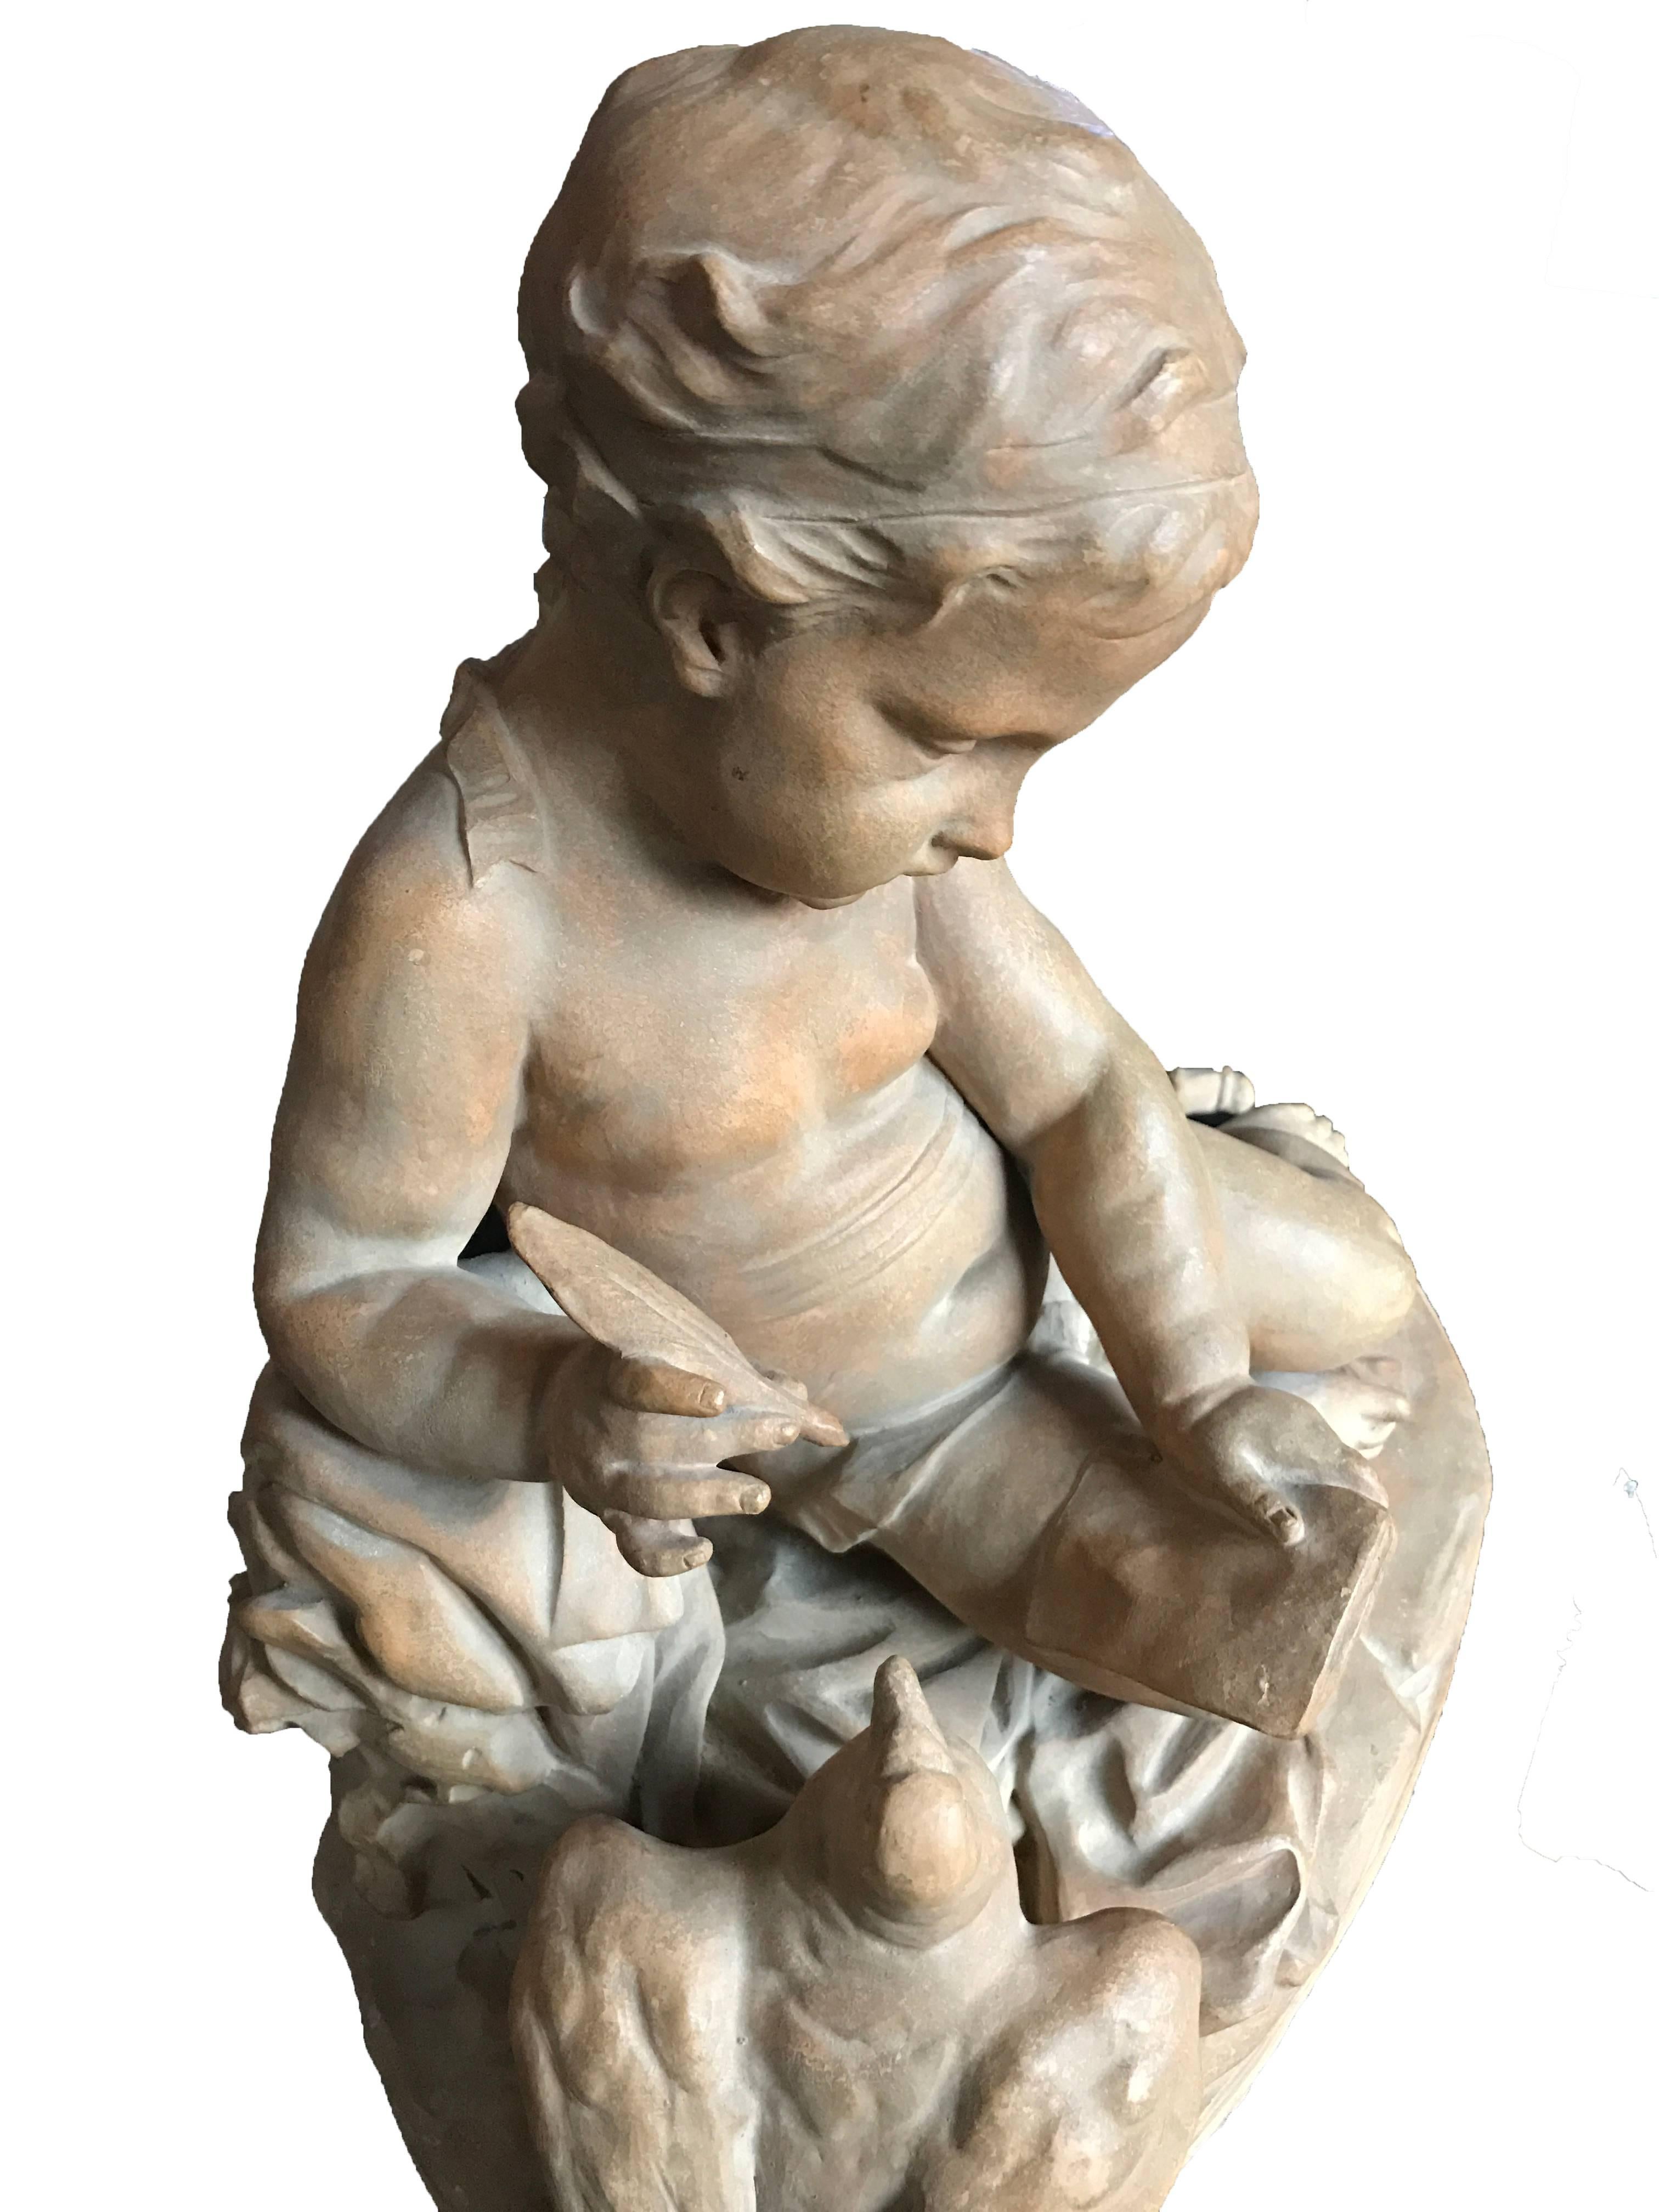 Art reproduction in terracotta, Allegory of literature after Jean baptiste Pigalle, measures: H 46 x L 43 x P 27 cm.
Our model is similar to the one carved by Jean-Baptiste Pigalle (1714-1785) in the vein of these allegorical statues very